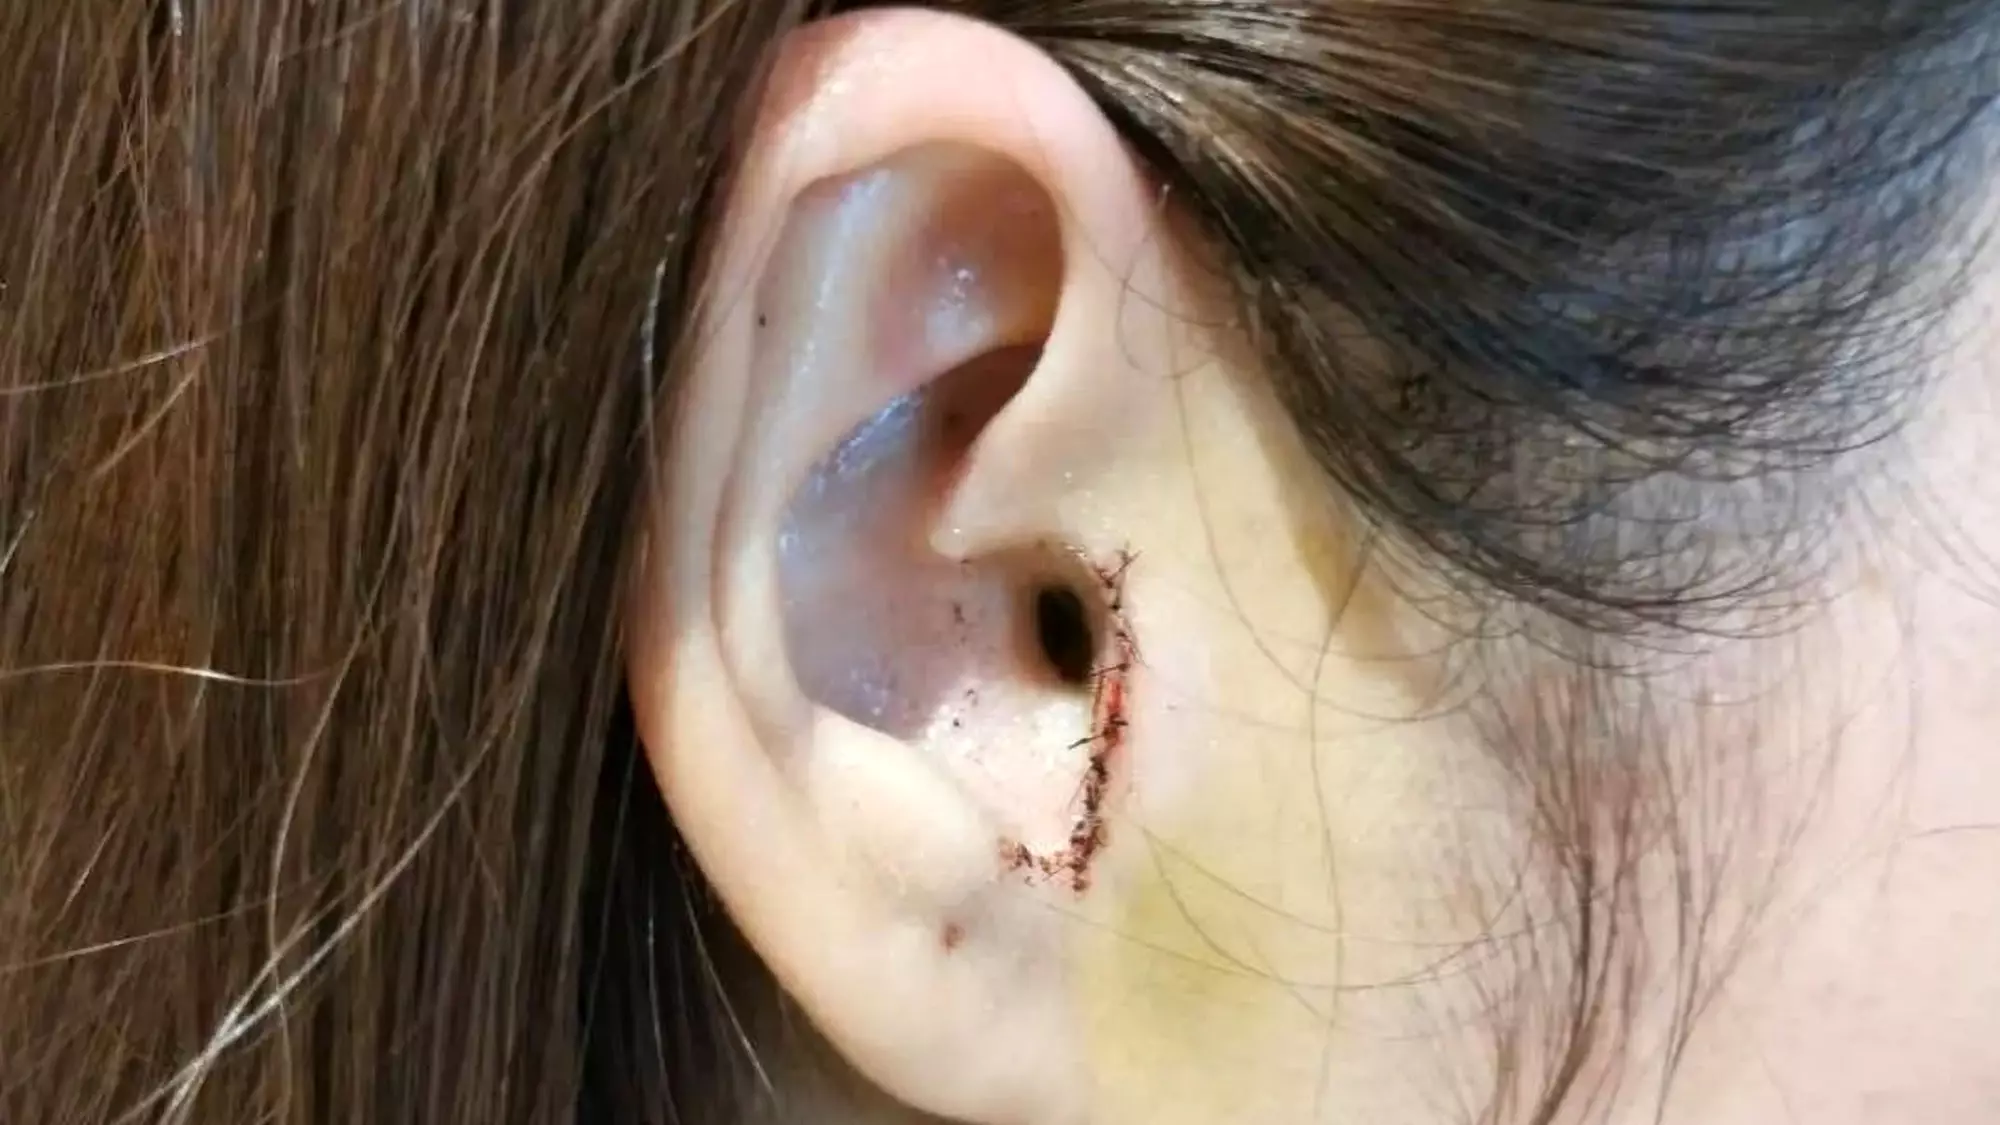 Woman Unknowingly Has Part Of Her Ear Removed During Nose Job Surgery